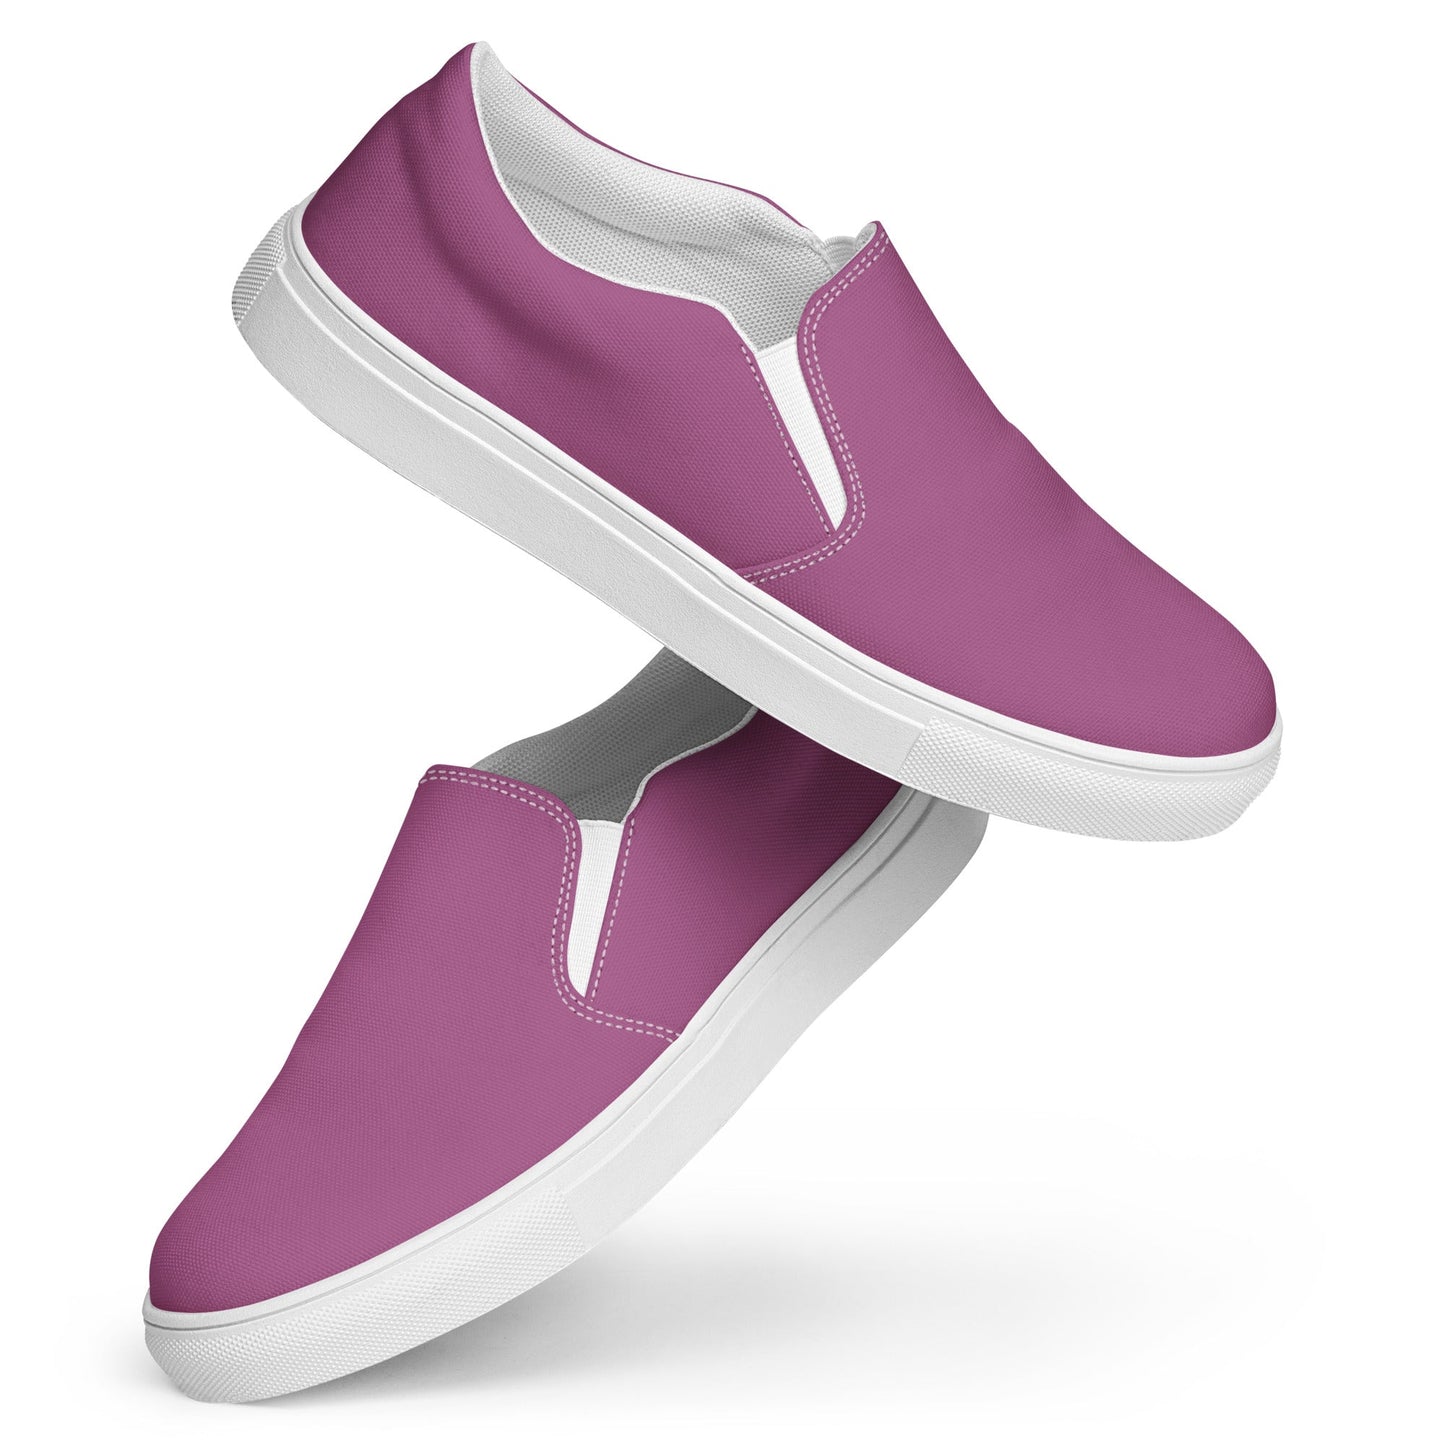 klasneakers Women’s slip-on canvas shoes - Candy Wrapper Pink